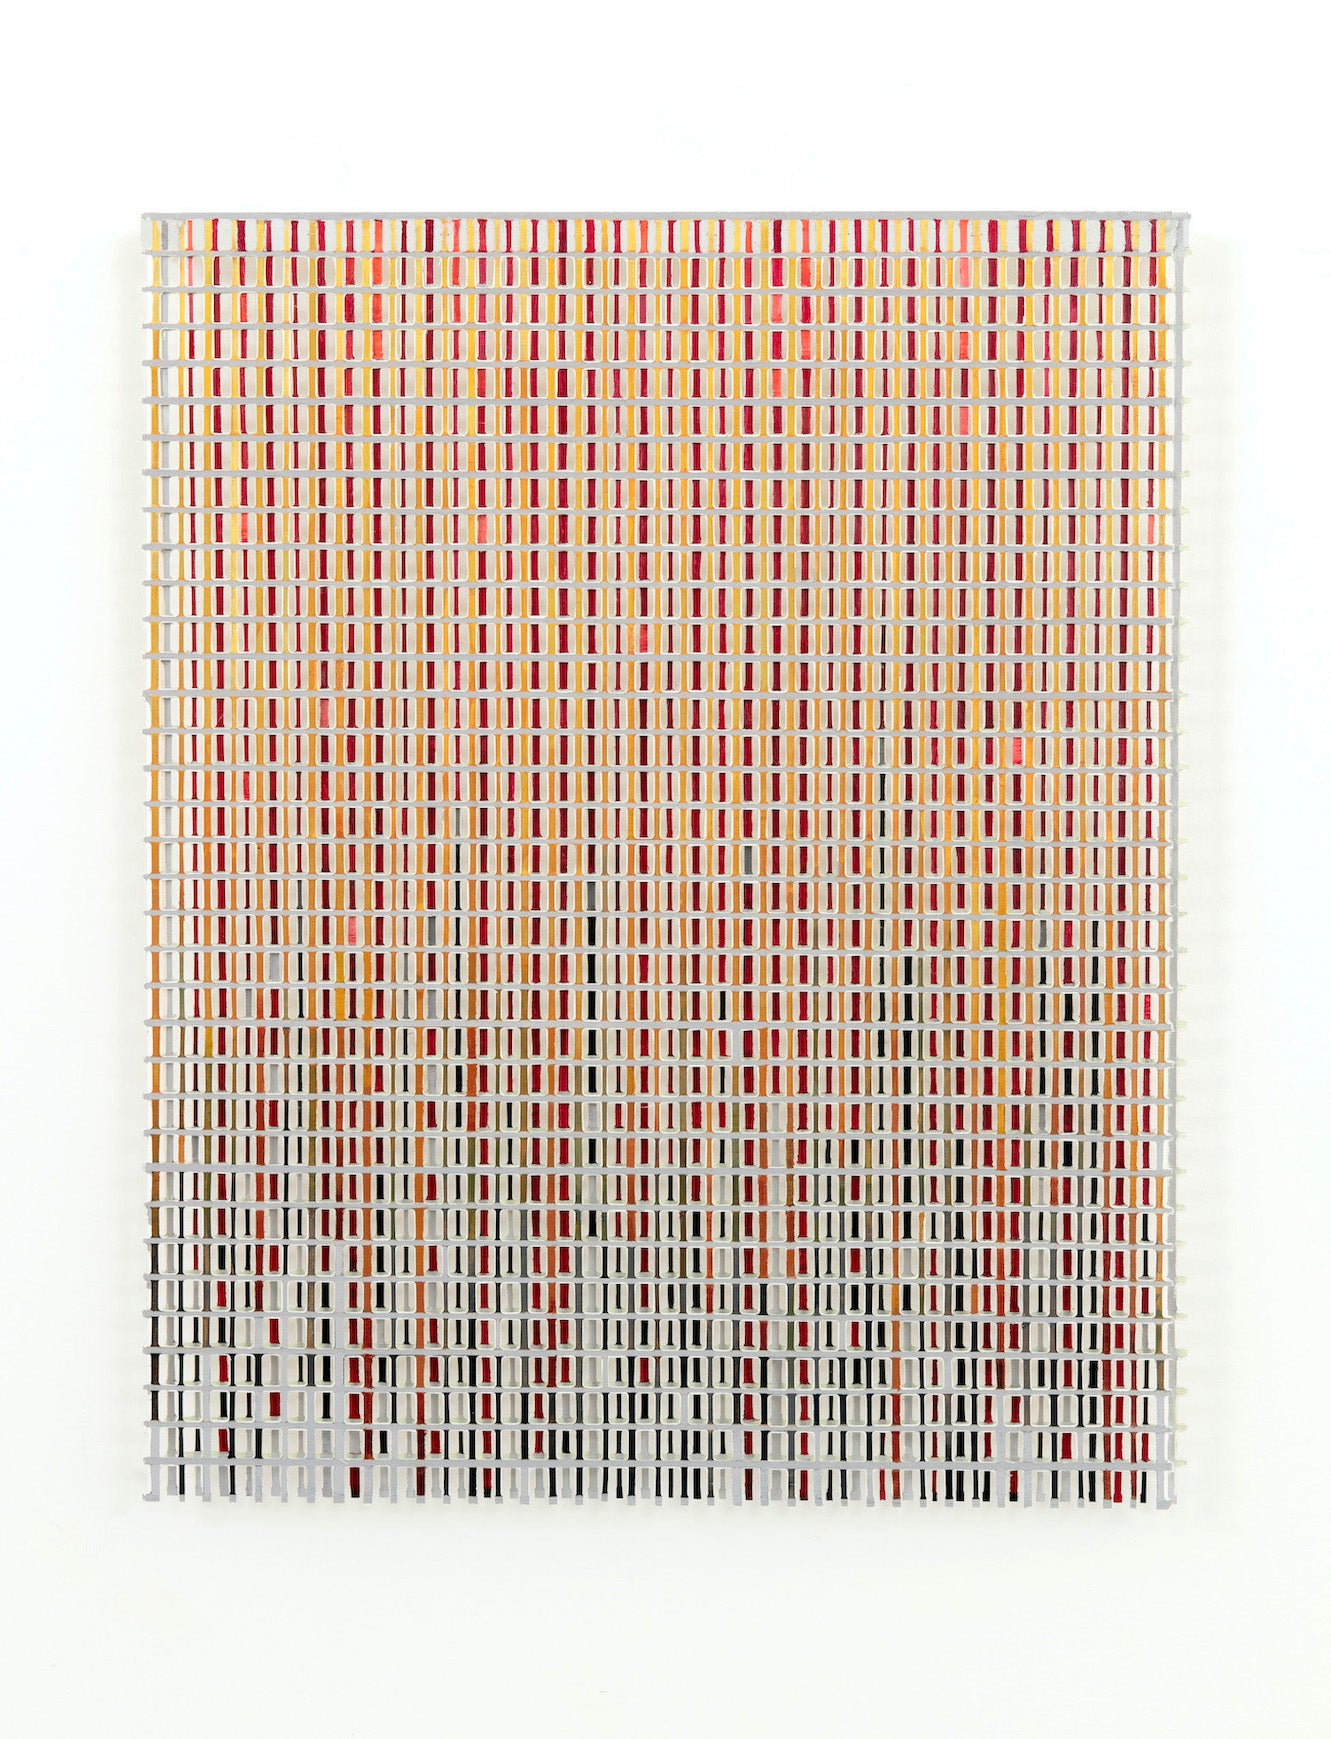 Jane Lackey, Doubling orange/red, 2022, 20 x 16 inches, paint, hand cut, layered kozo paper